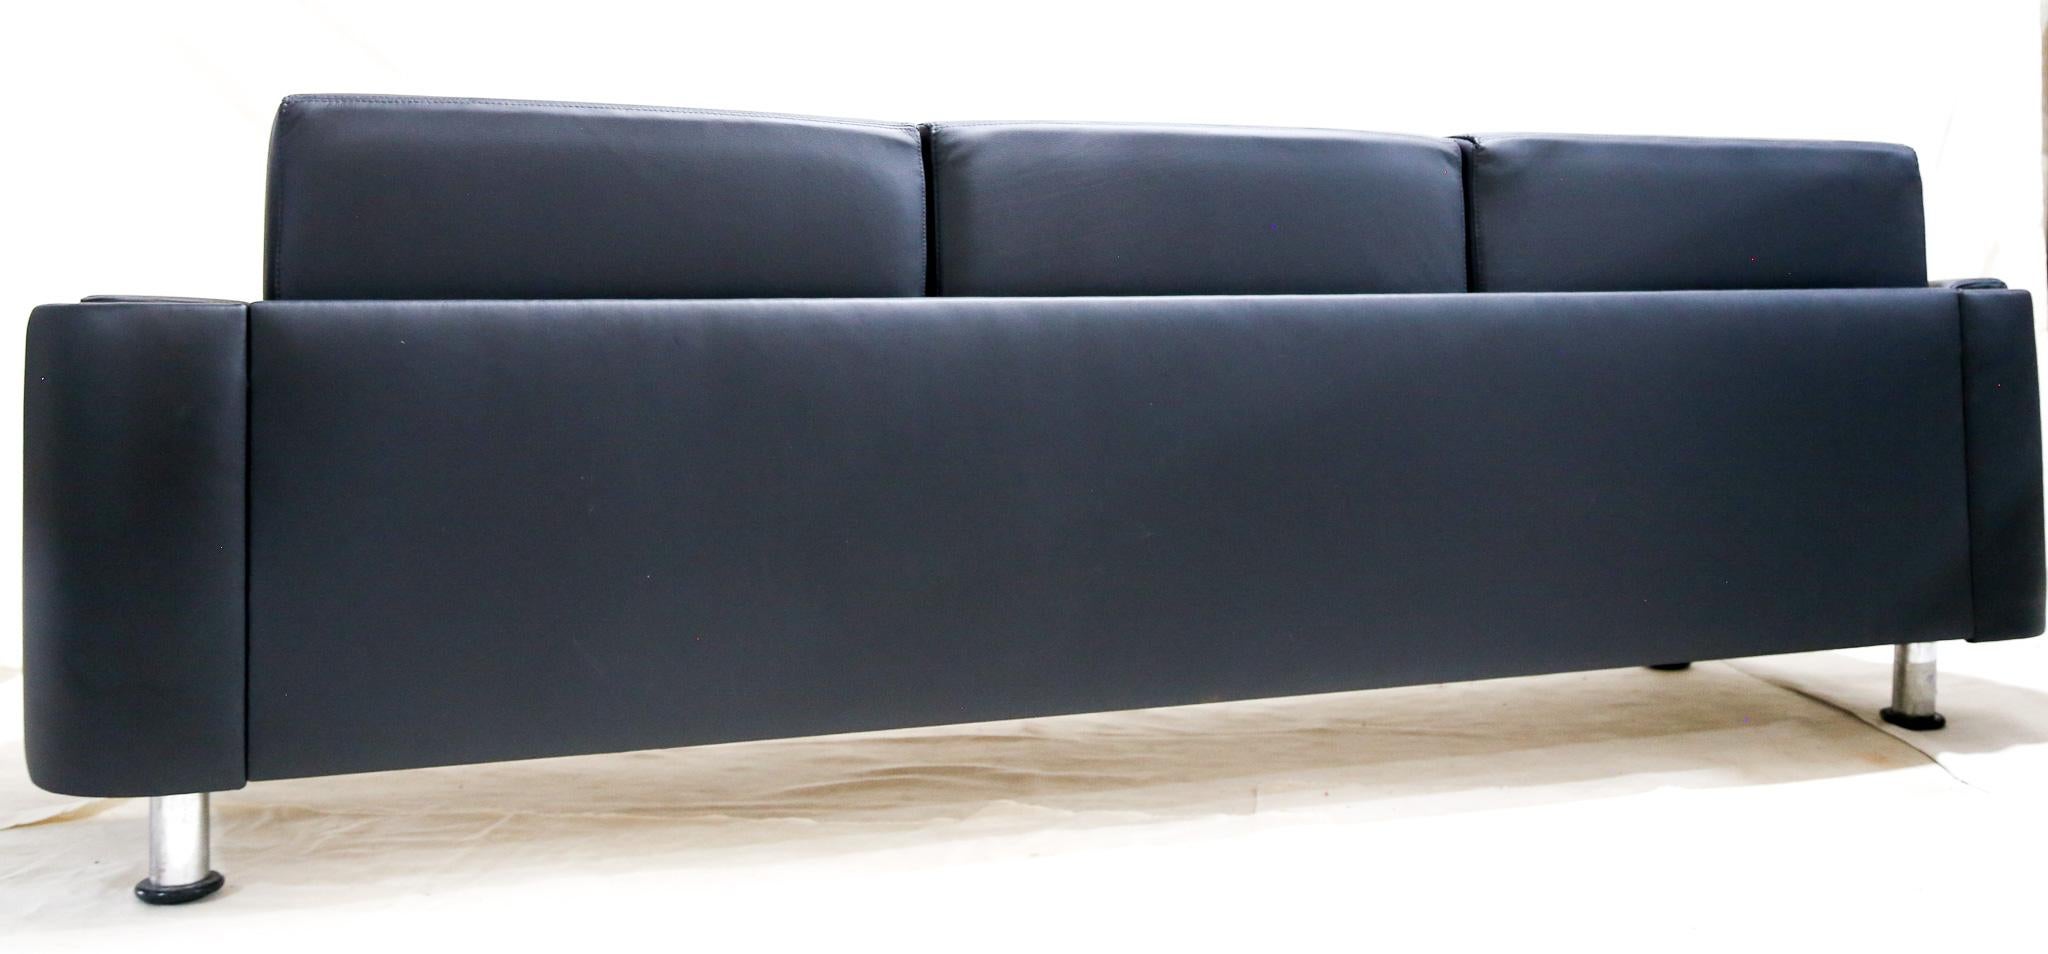 Mid-Century Modern Sofa in Black Leather & Wood by Jorge Zalszupin, Brazil, 1970 For Sale 7